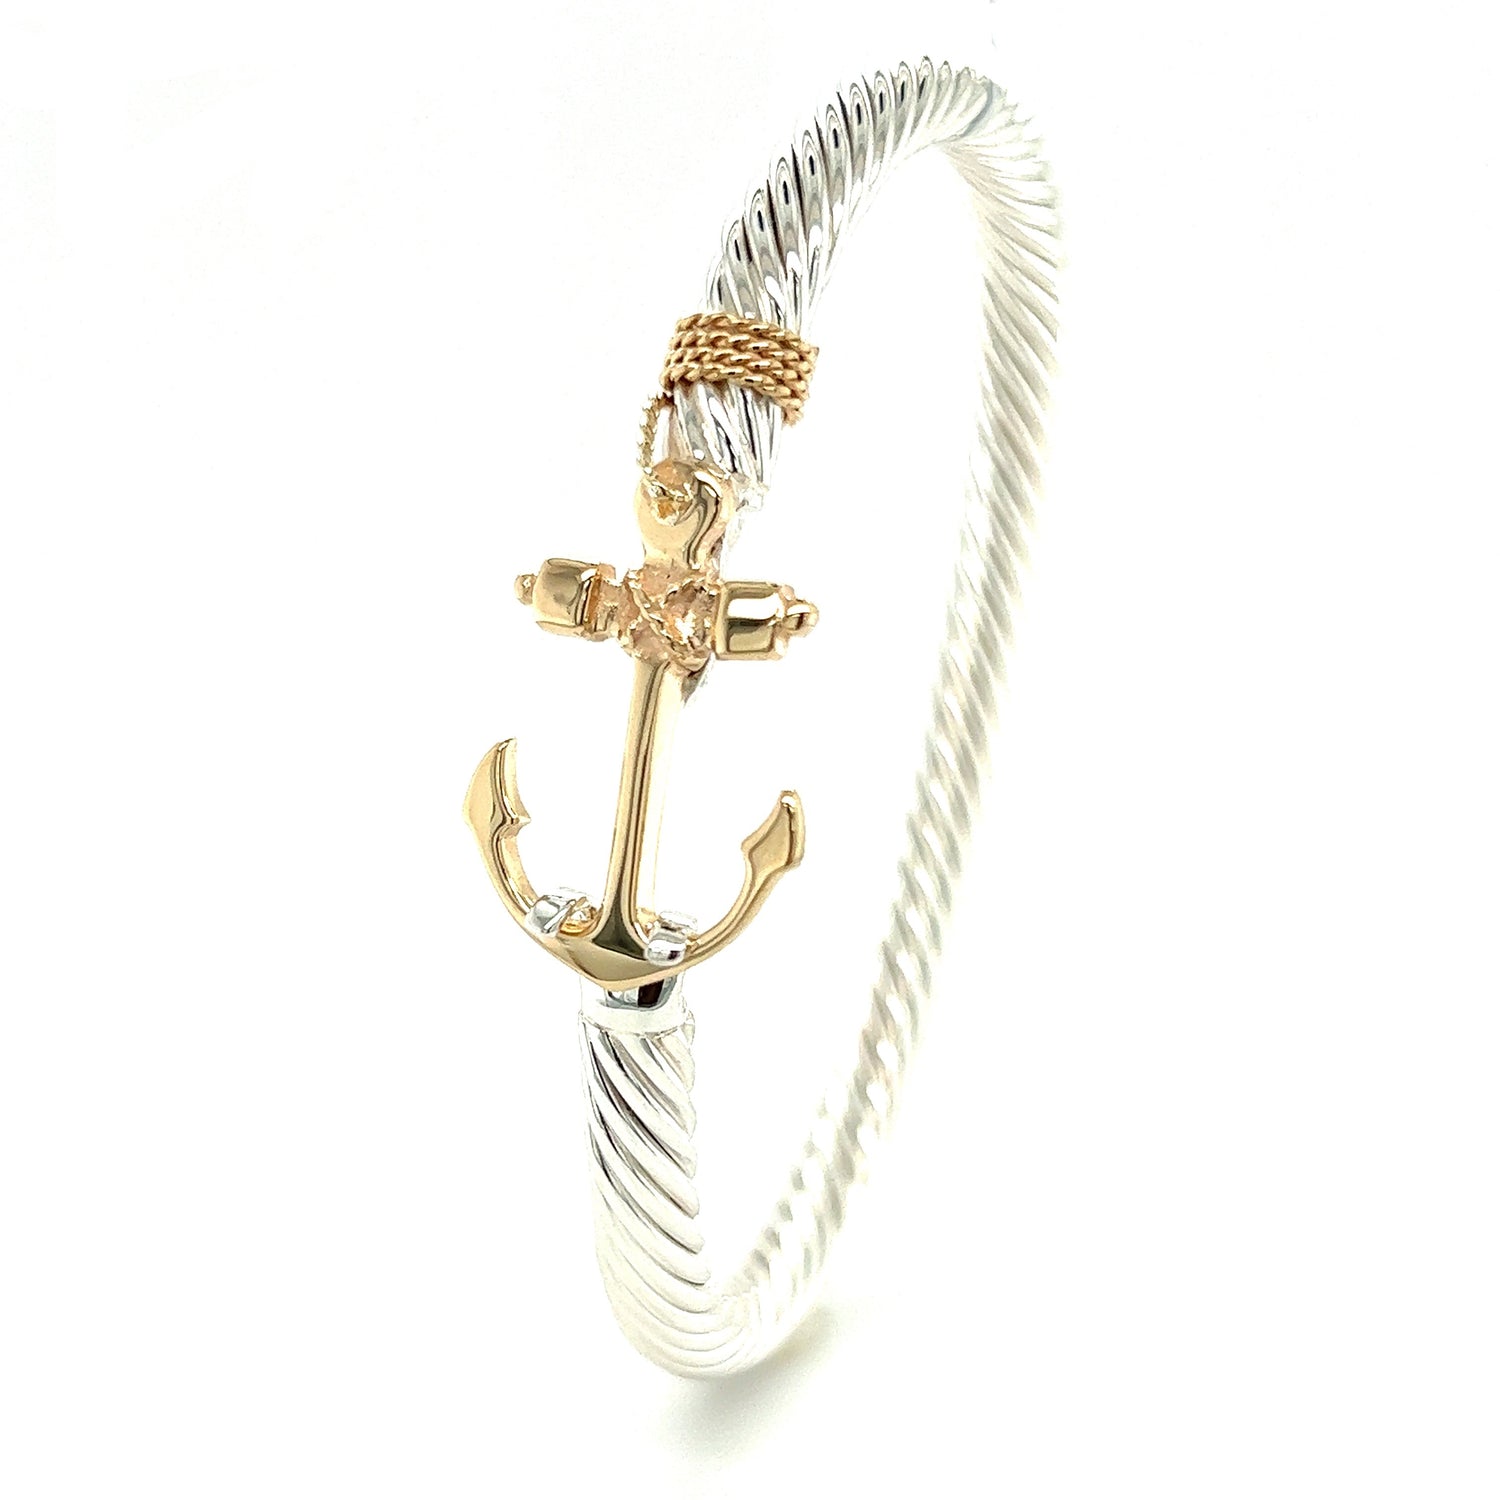 Twisted Cable 5mm Bangle Bracelet with 14K Yellow Gold Anchor and Wrap in Sterling Silver Front View